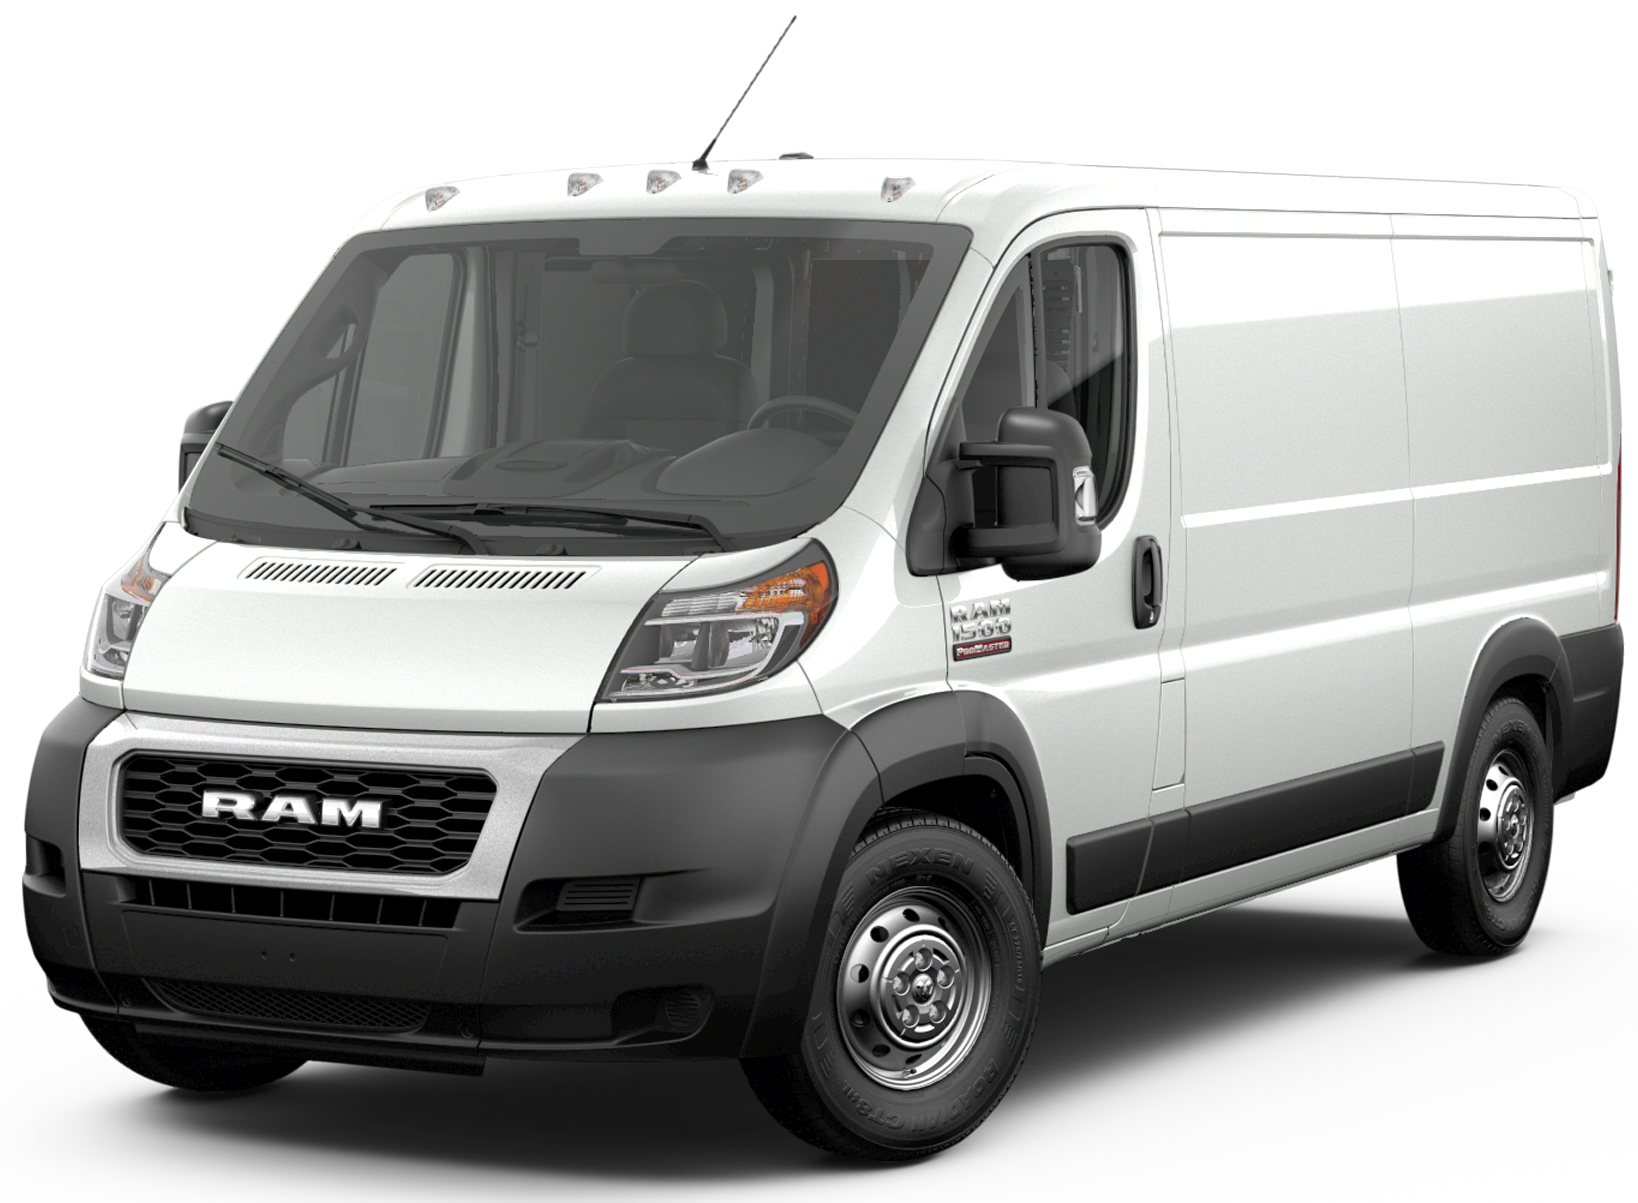 2019 Ram ProMaster 1500 Incentives, Specials & Offers in Jersey City NJ